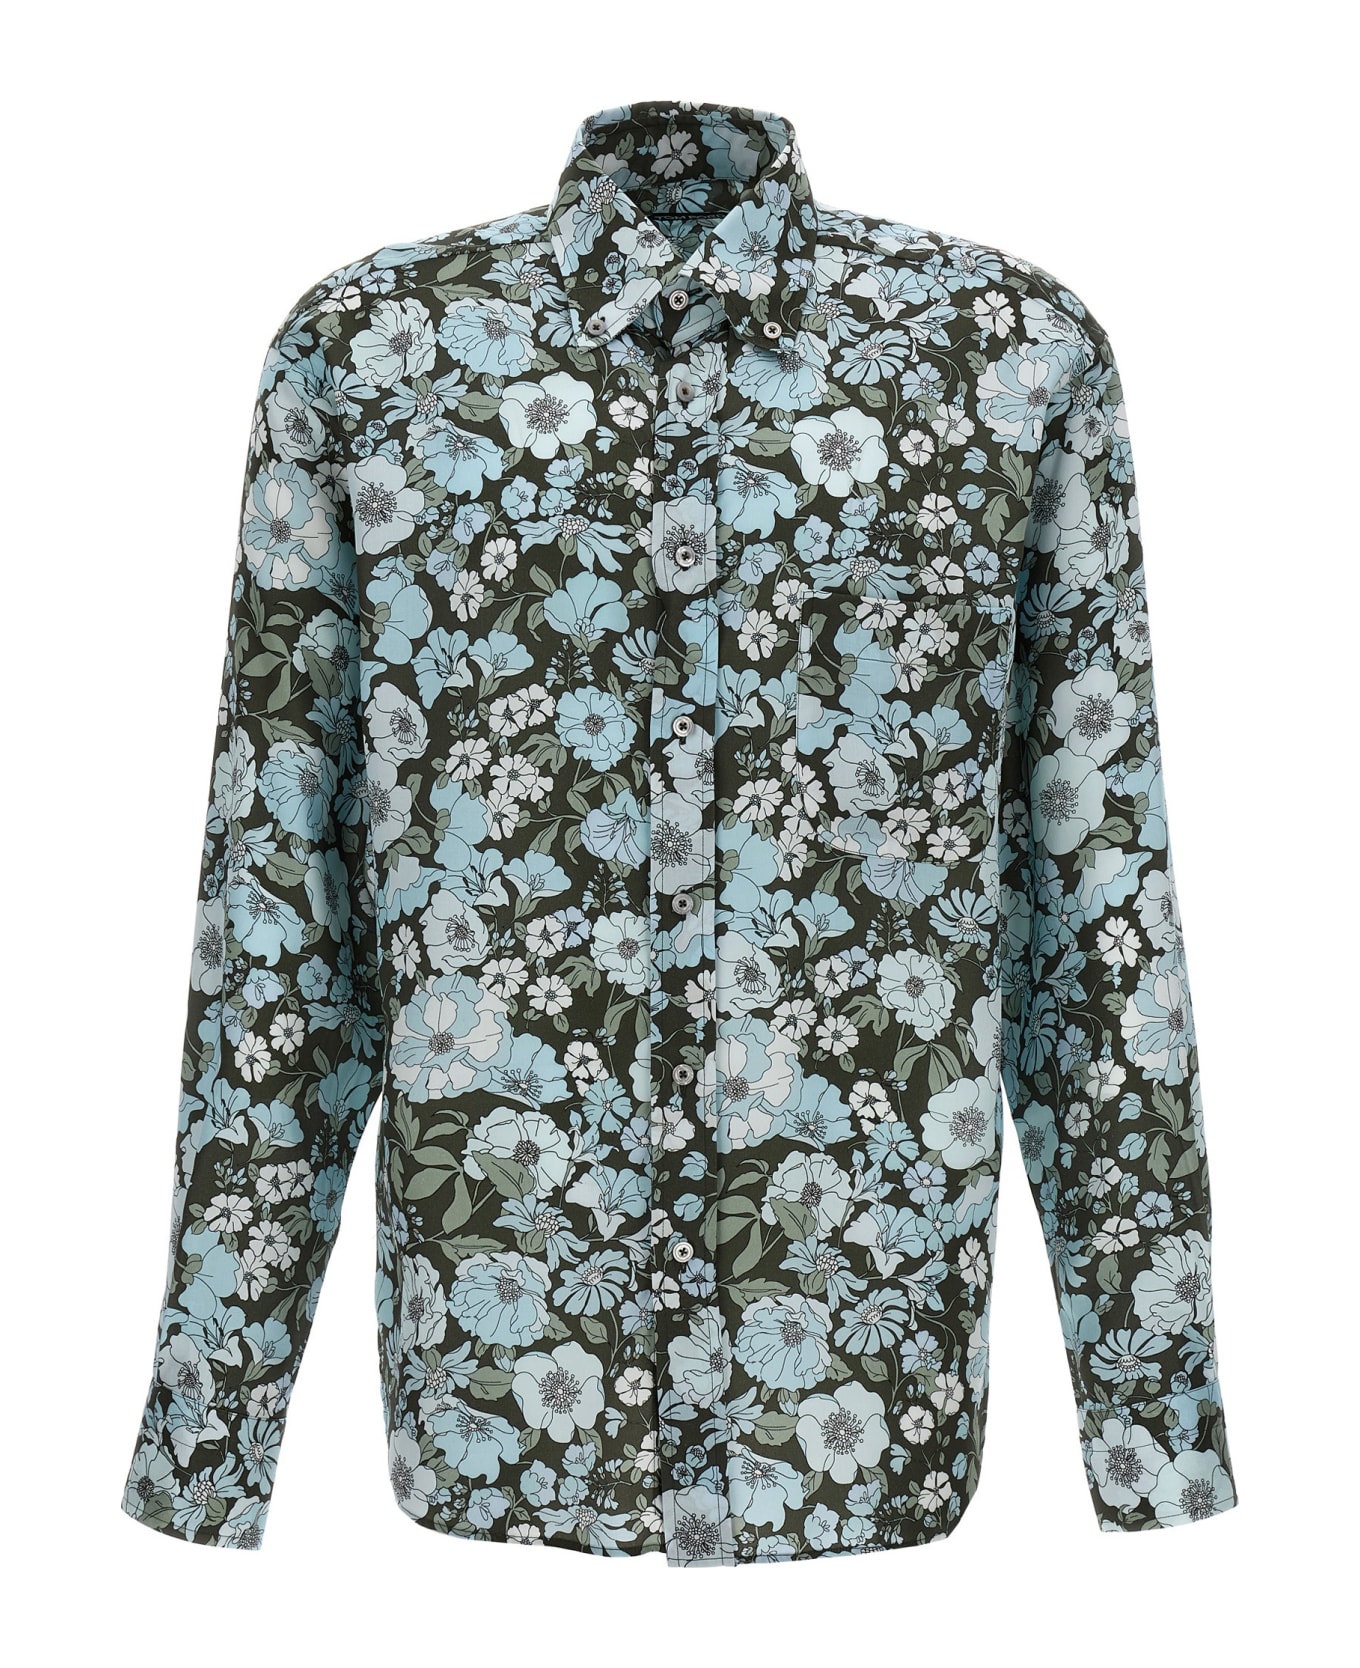 Tom Ford Floral Print Shirt - Multicolor シャツ